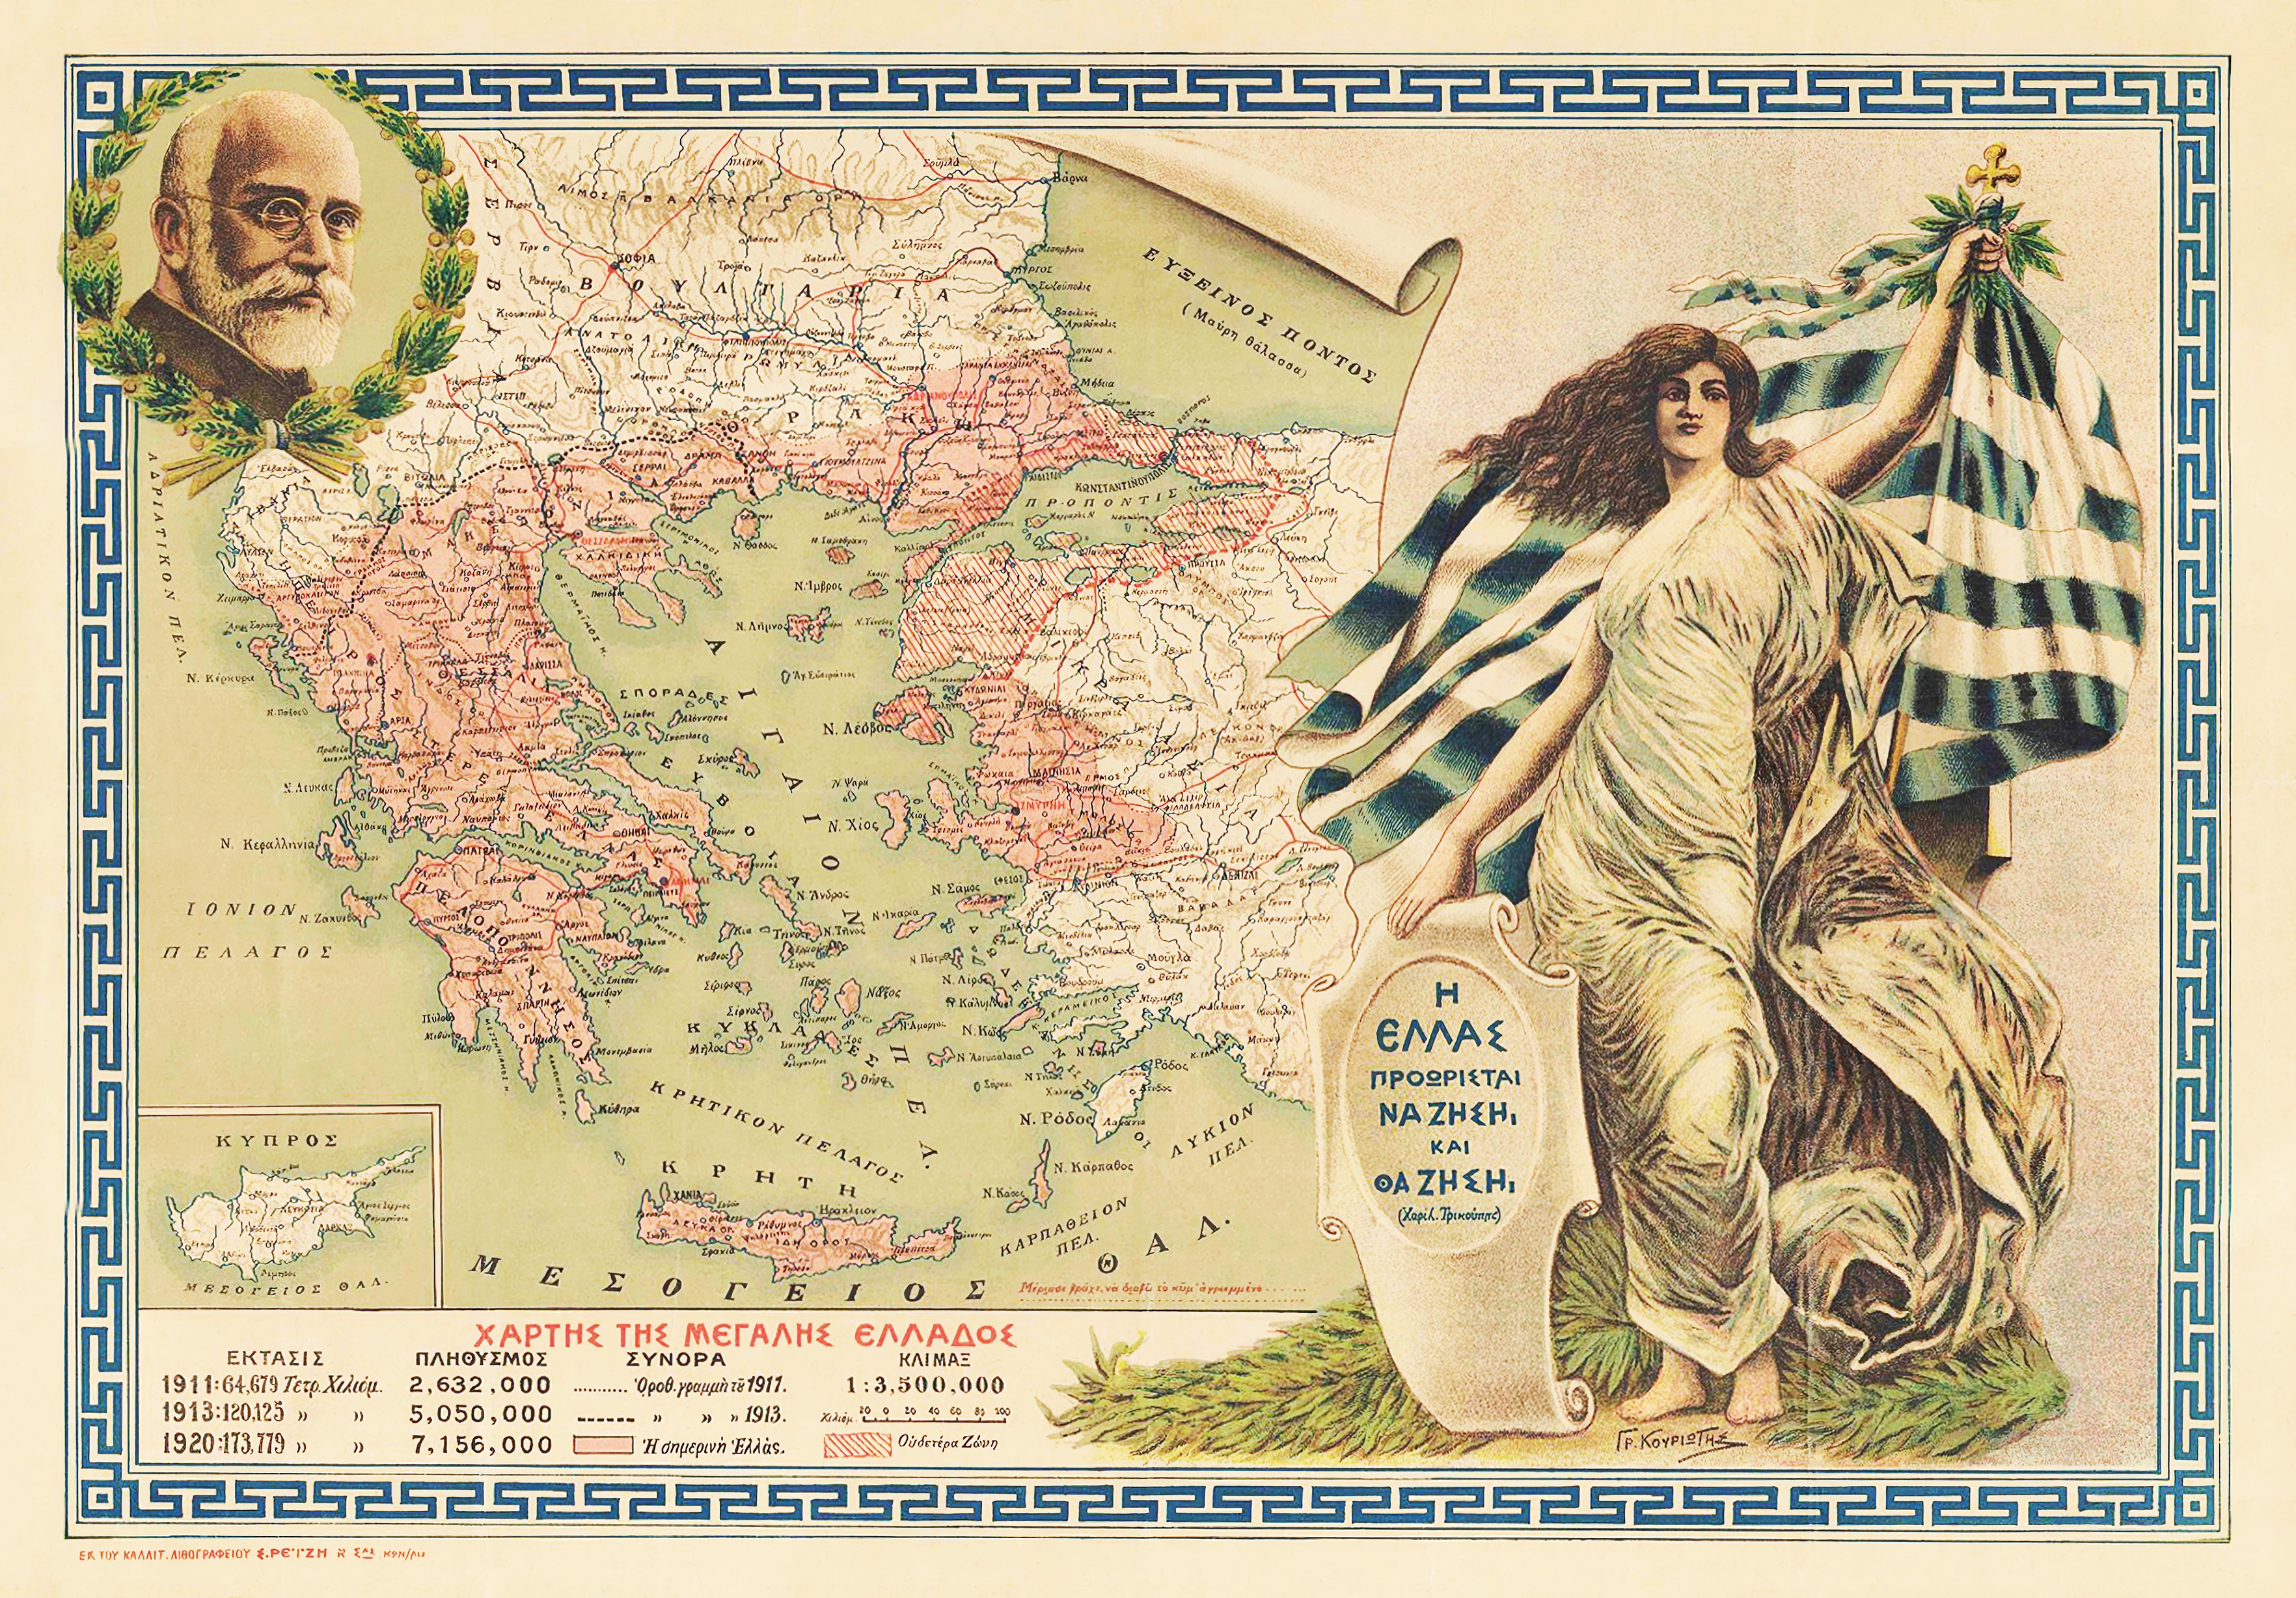 A 1920 map of Great Greece, after the Treaty of Sèvres, featuring the portrait of Eleftherios Venizelos. The words on the right translate to "Greece is destined to live and will live." 